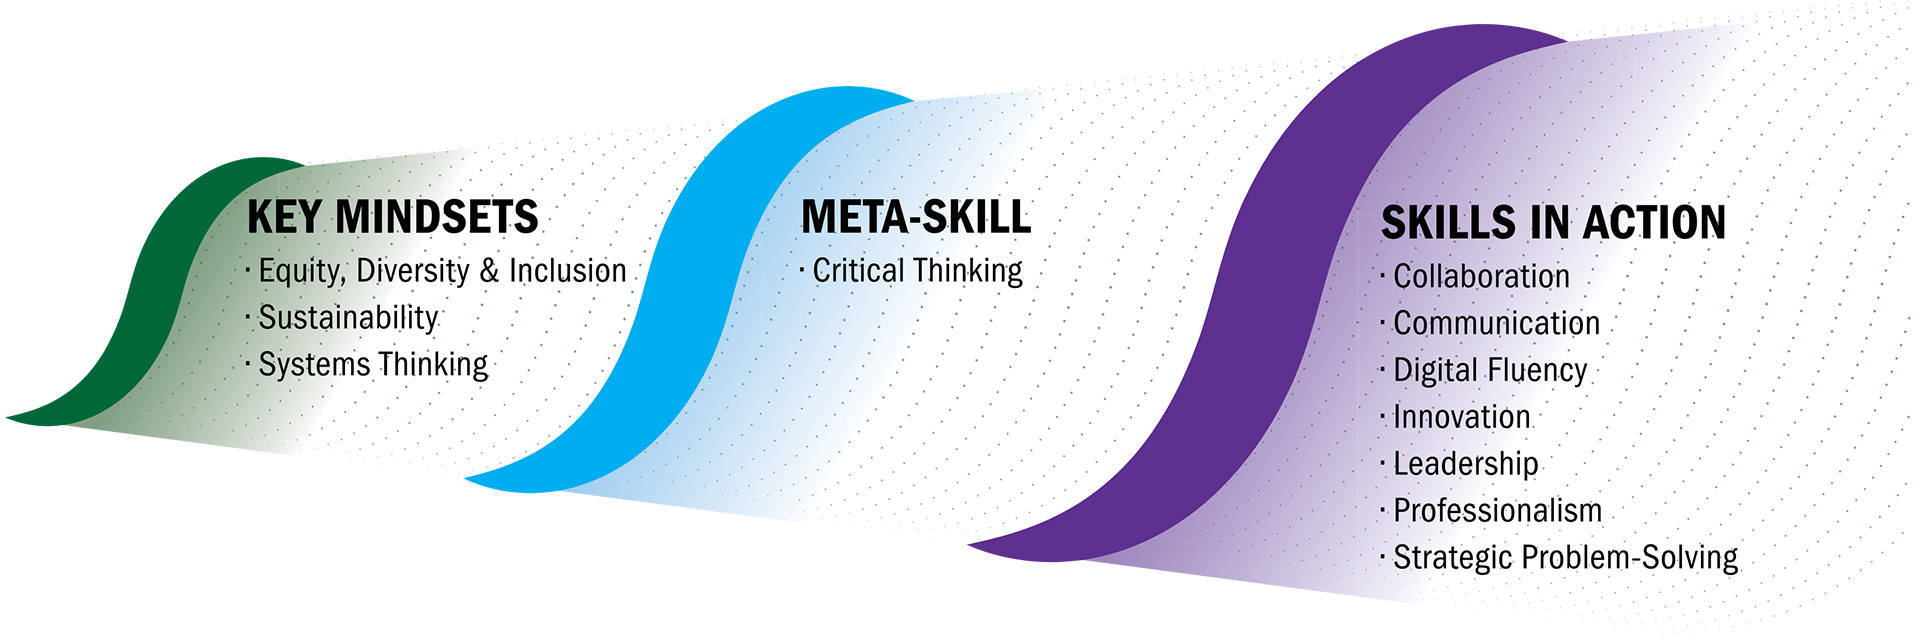 The Humber Learning Outcomes Framework. The first Main Learning Outcome is Key Mindsets which includes EDI, sustainability, and systems thinking. The second Main Learning Outcome is Meta-Skill which includes Critical Thinking. The third is Skills in Action, which includes collaboration, communication, digital fluency, innovation, leadership, professionalism, and strategic problem-solving.